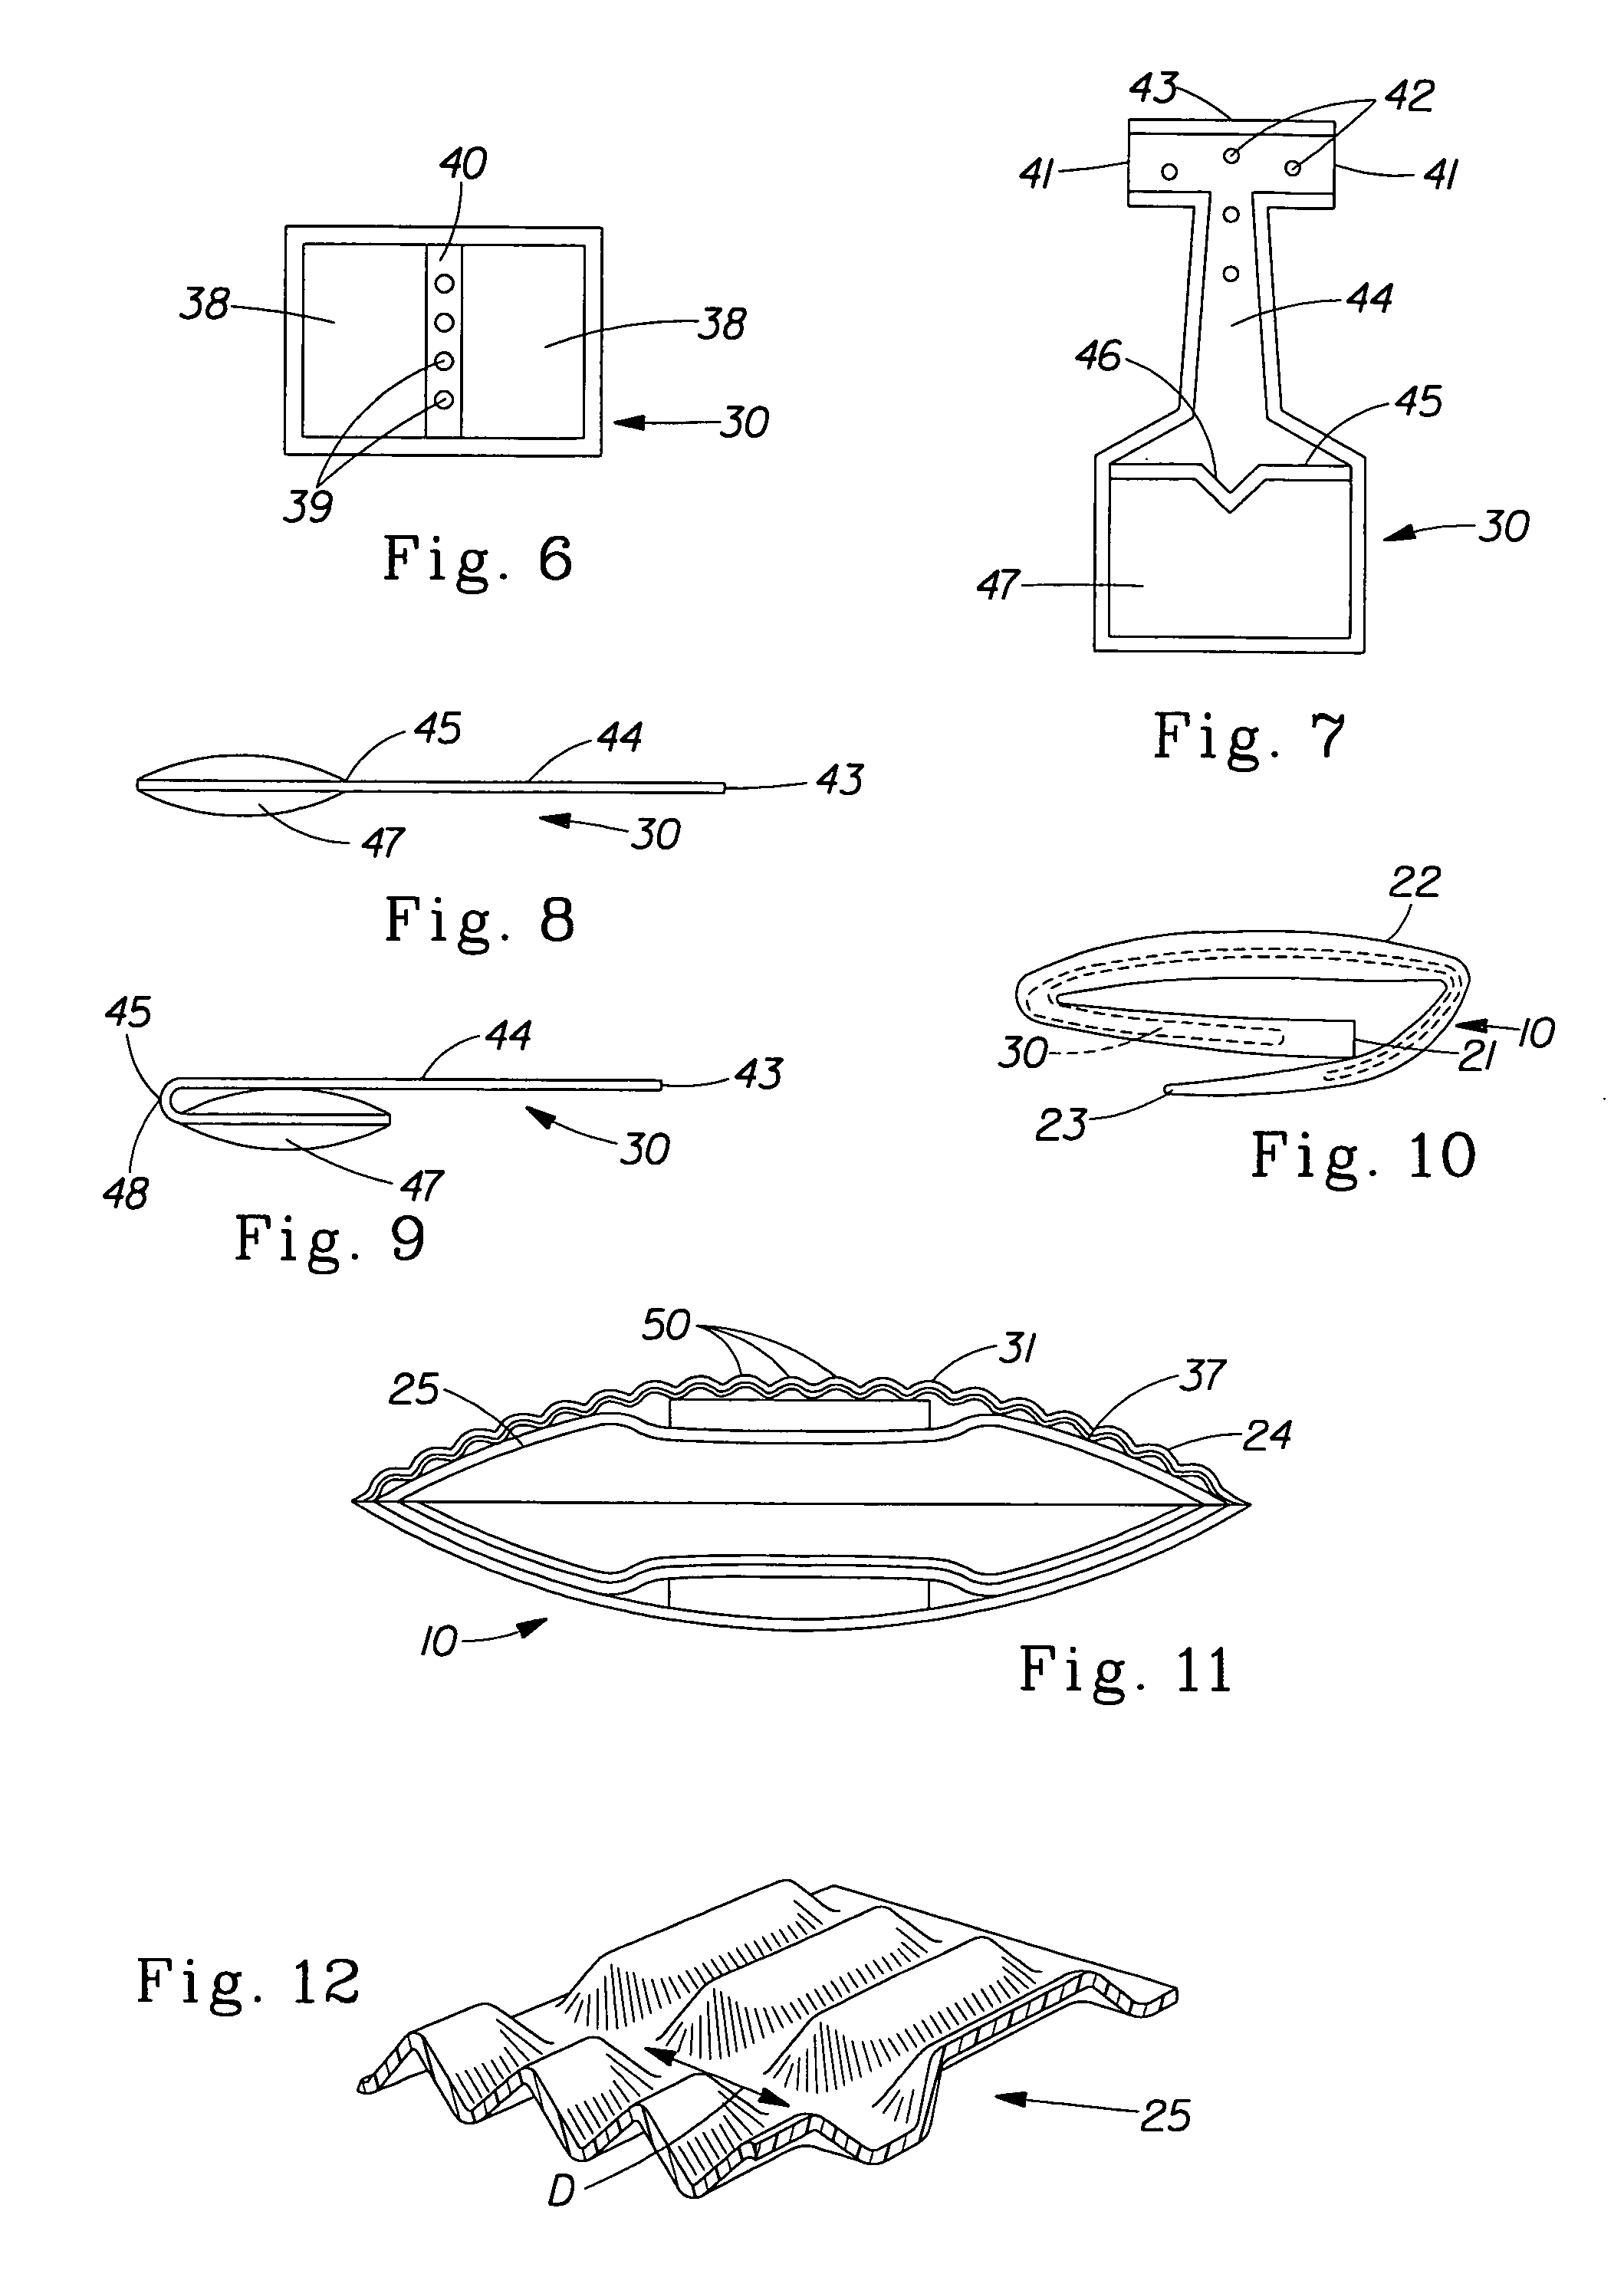 Semi-enclosed applicator for distributing a substance onto a target surface